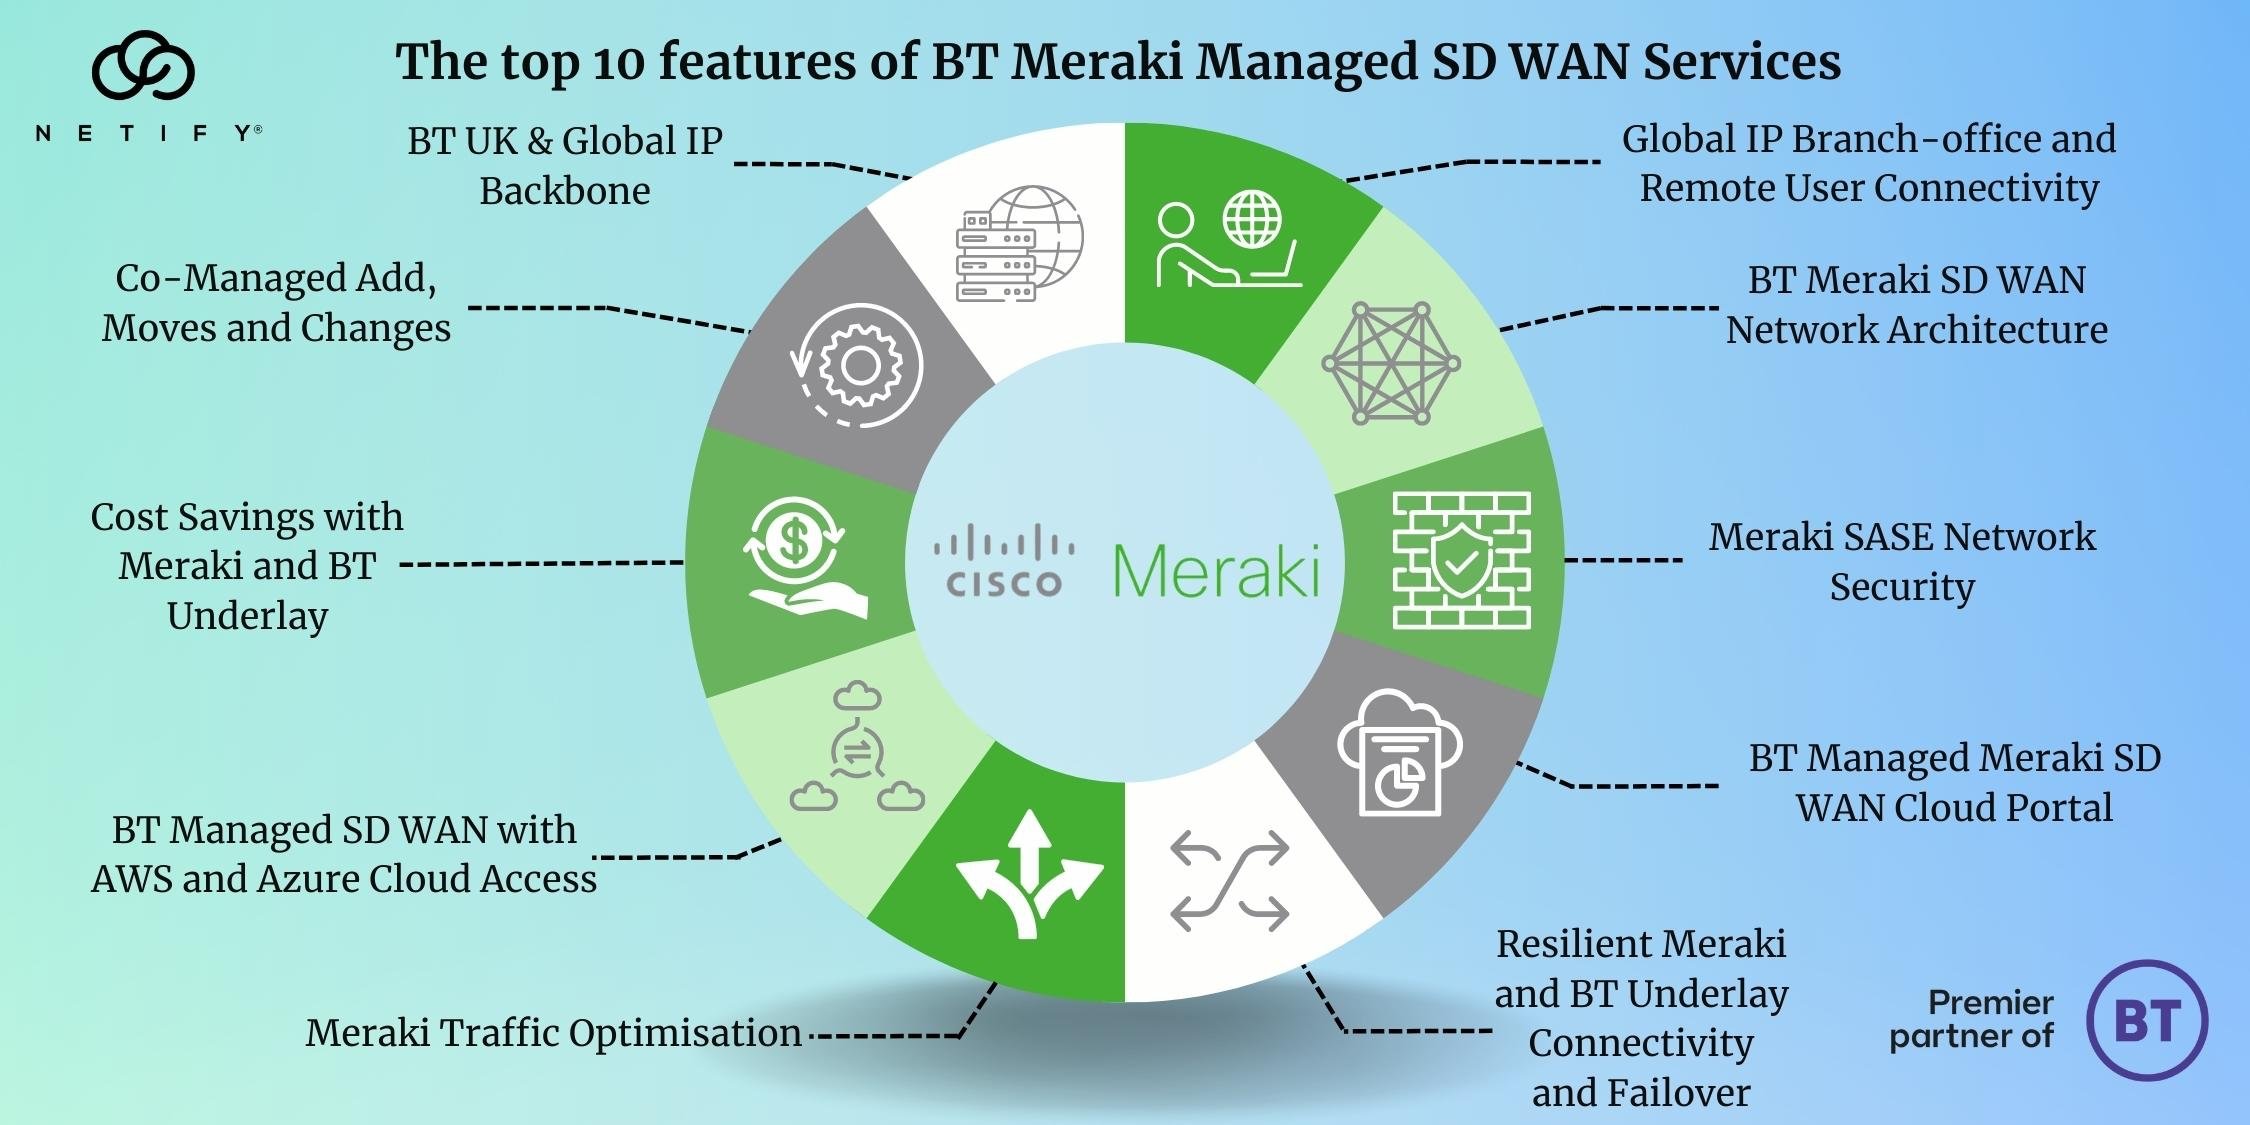 The top 10 features of BT Meraki Managed SD WAN Services